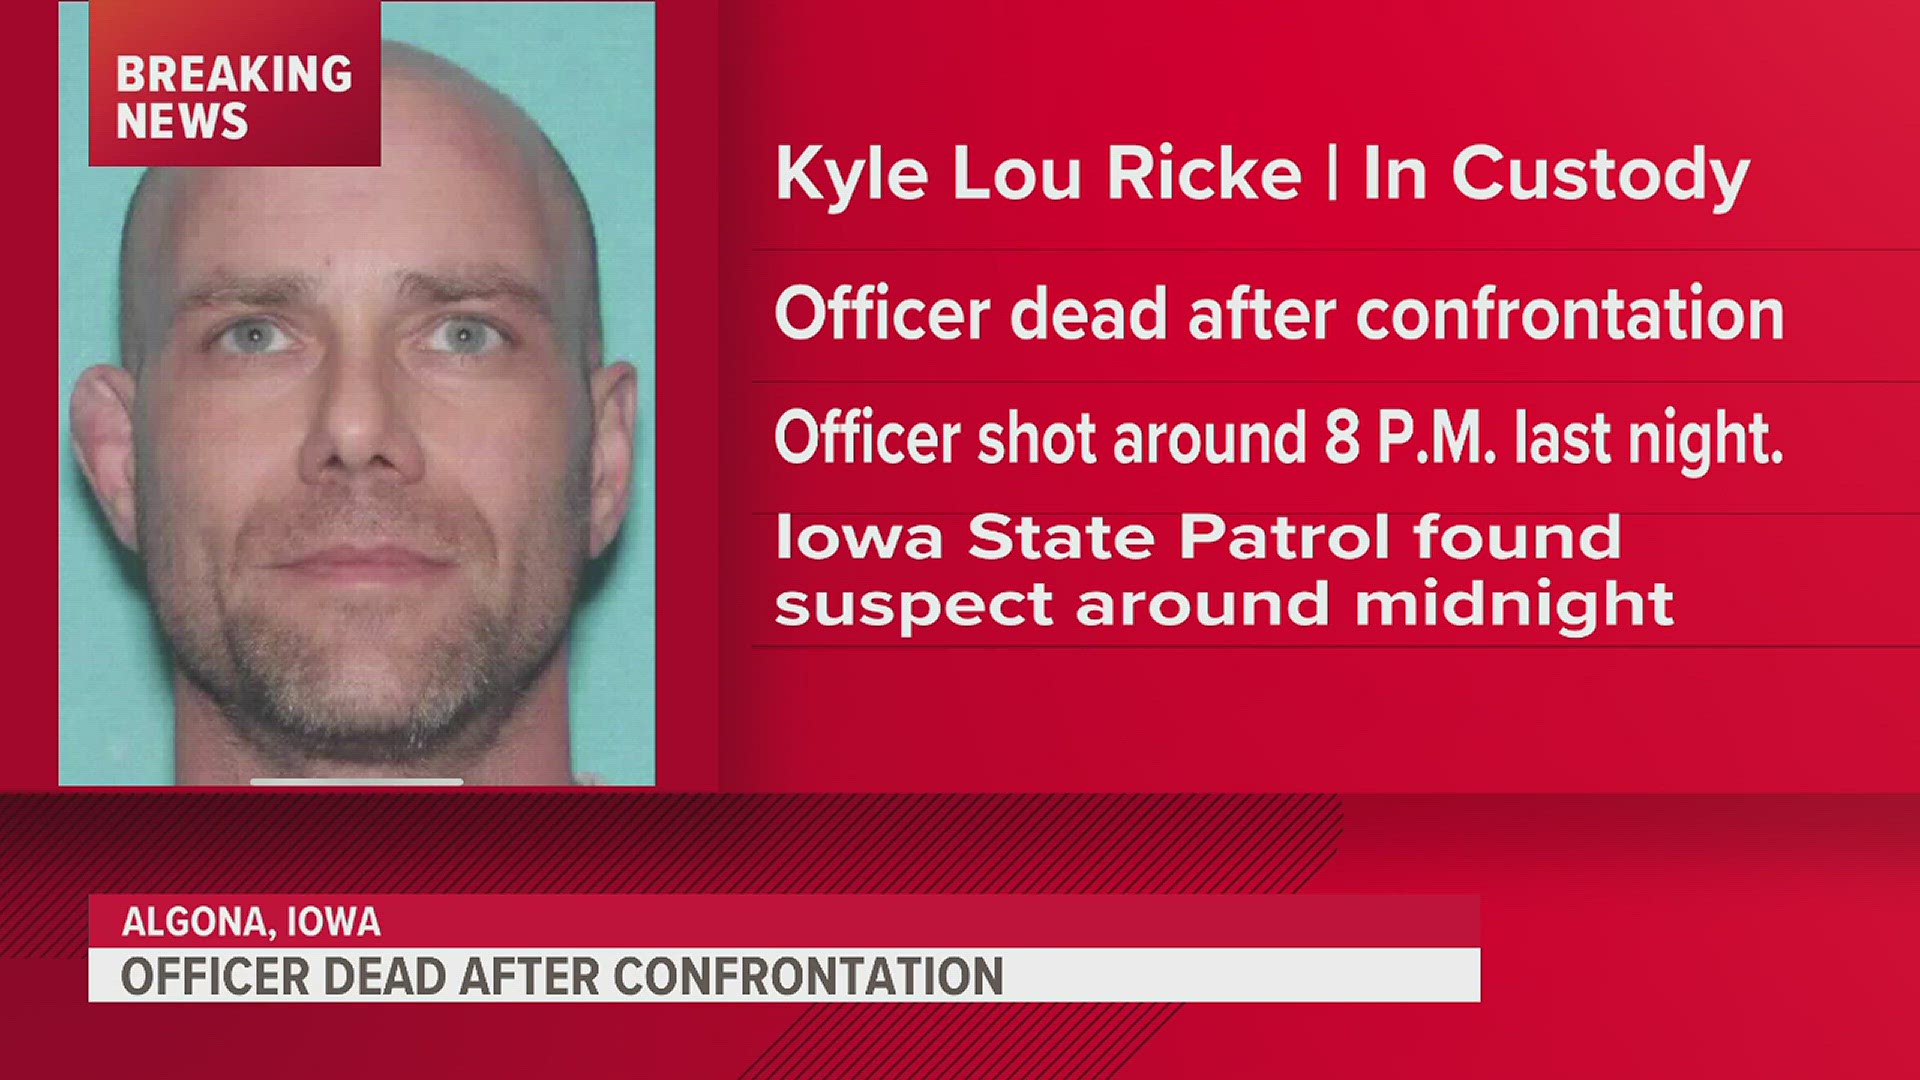 Iowa State Patrol announced this afternoon that an officer in Algona that had been shot has died. Suspect Kyle Ricke has been arrested for the alleged shooting.